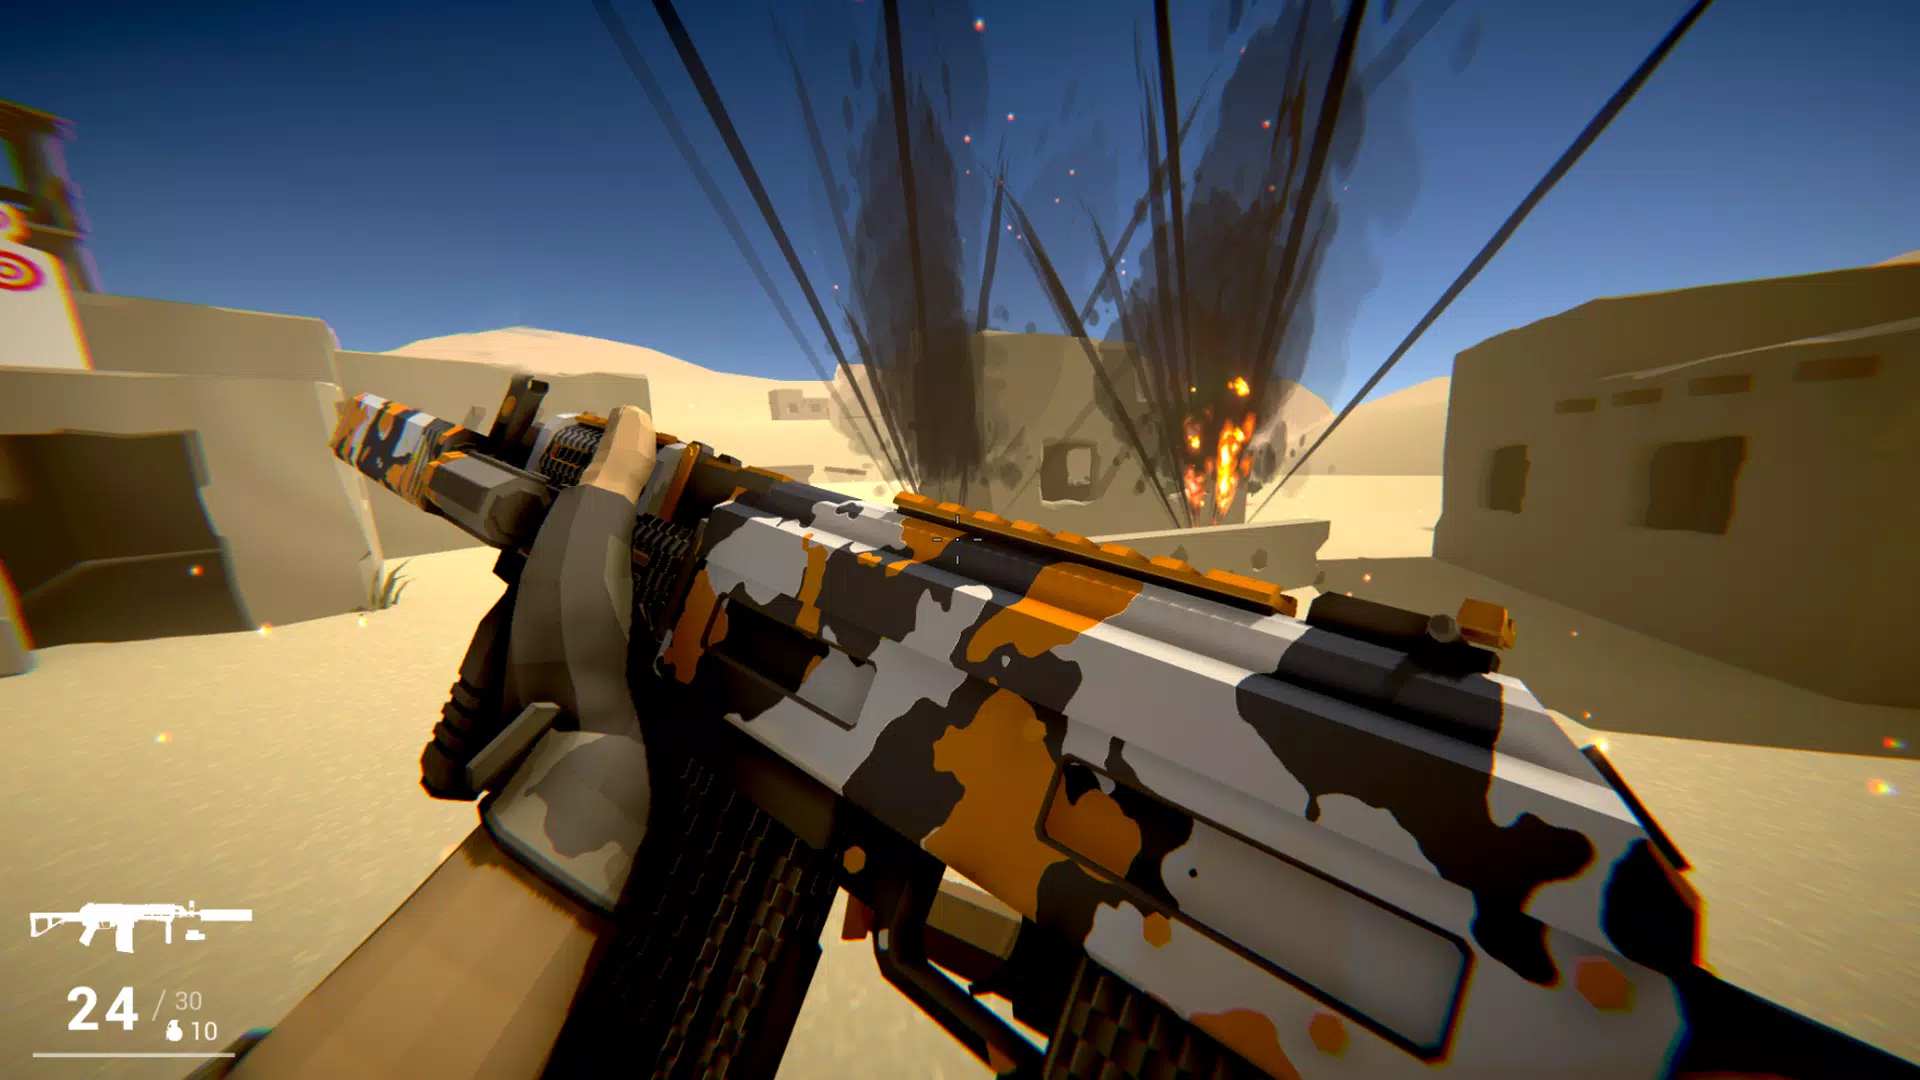 Nextbots In Backrooms: Shooter APK for Android Download